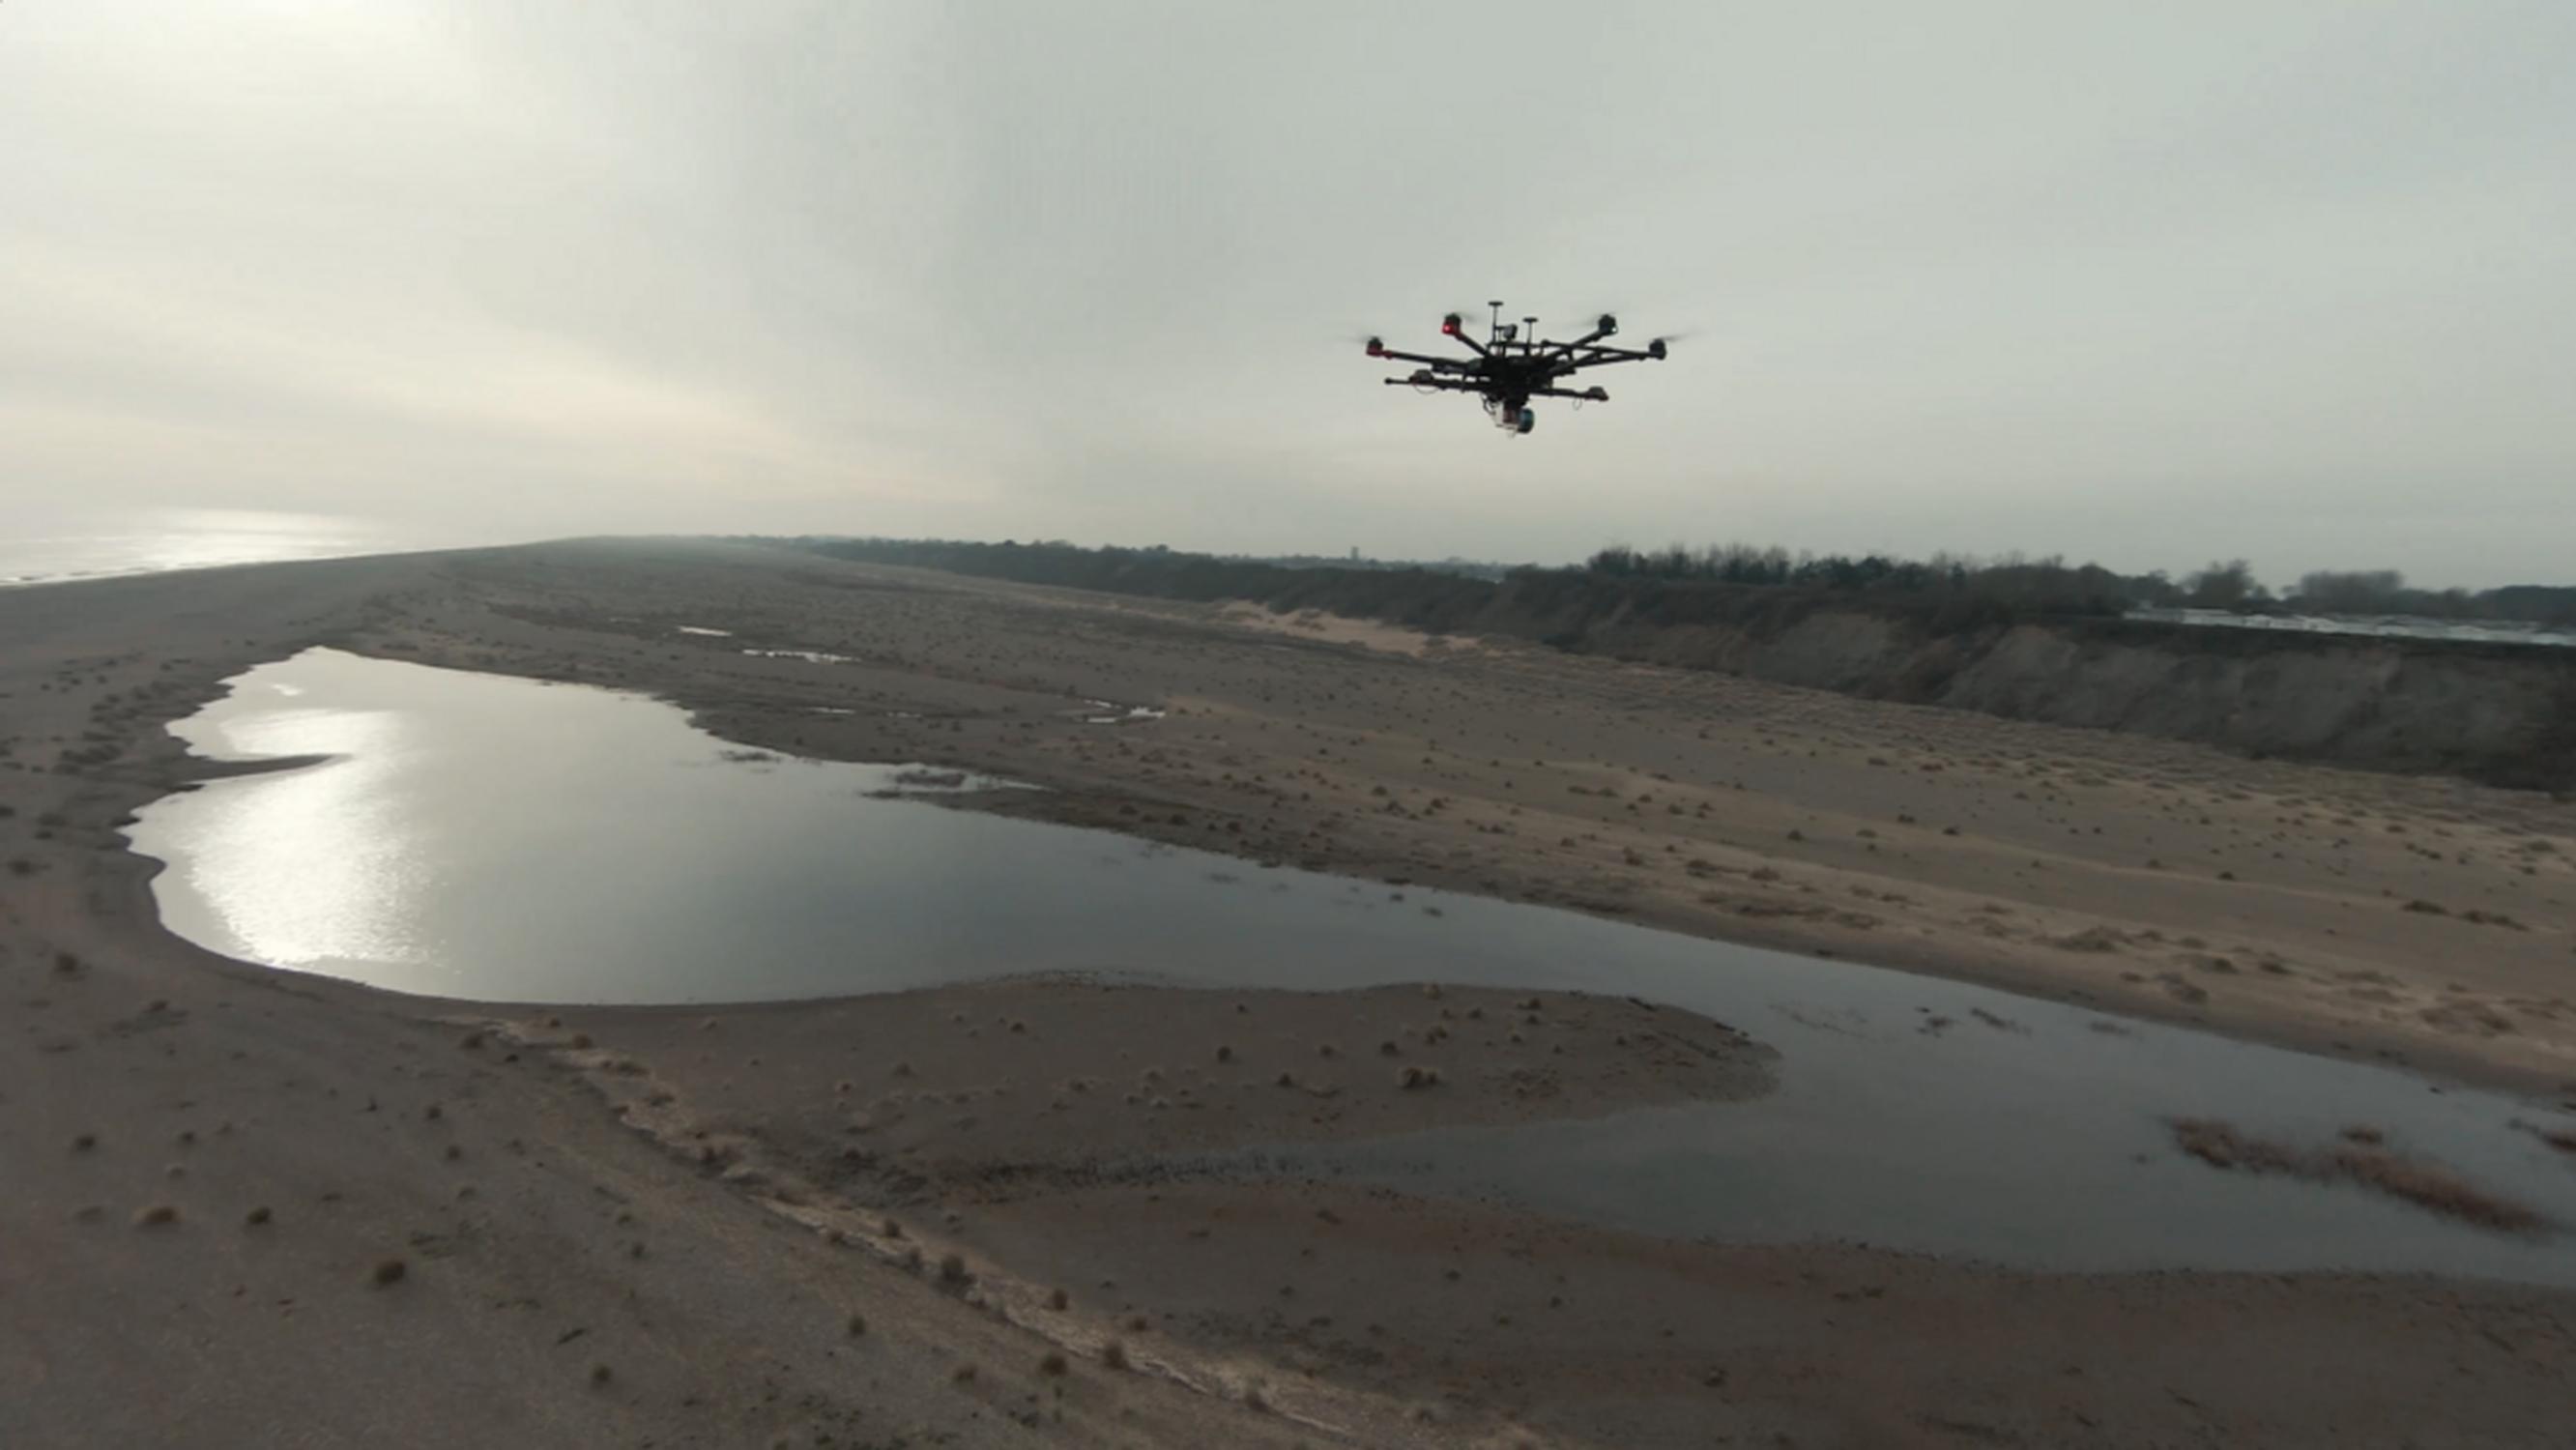 The Drone Pathfinder Catalyst programme has provided a transition for the UK from drone trialling to application